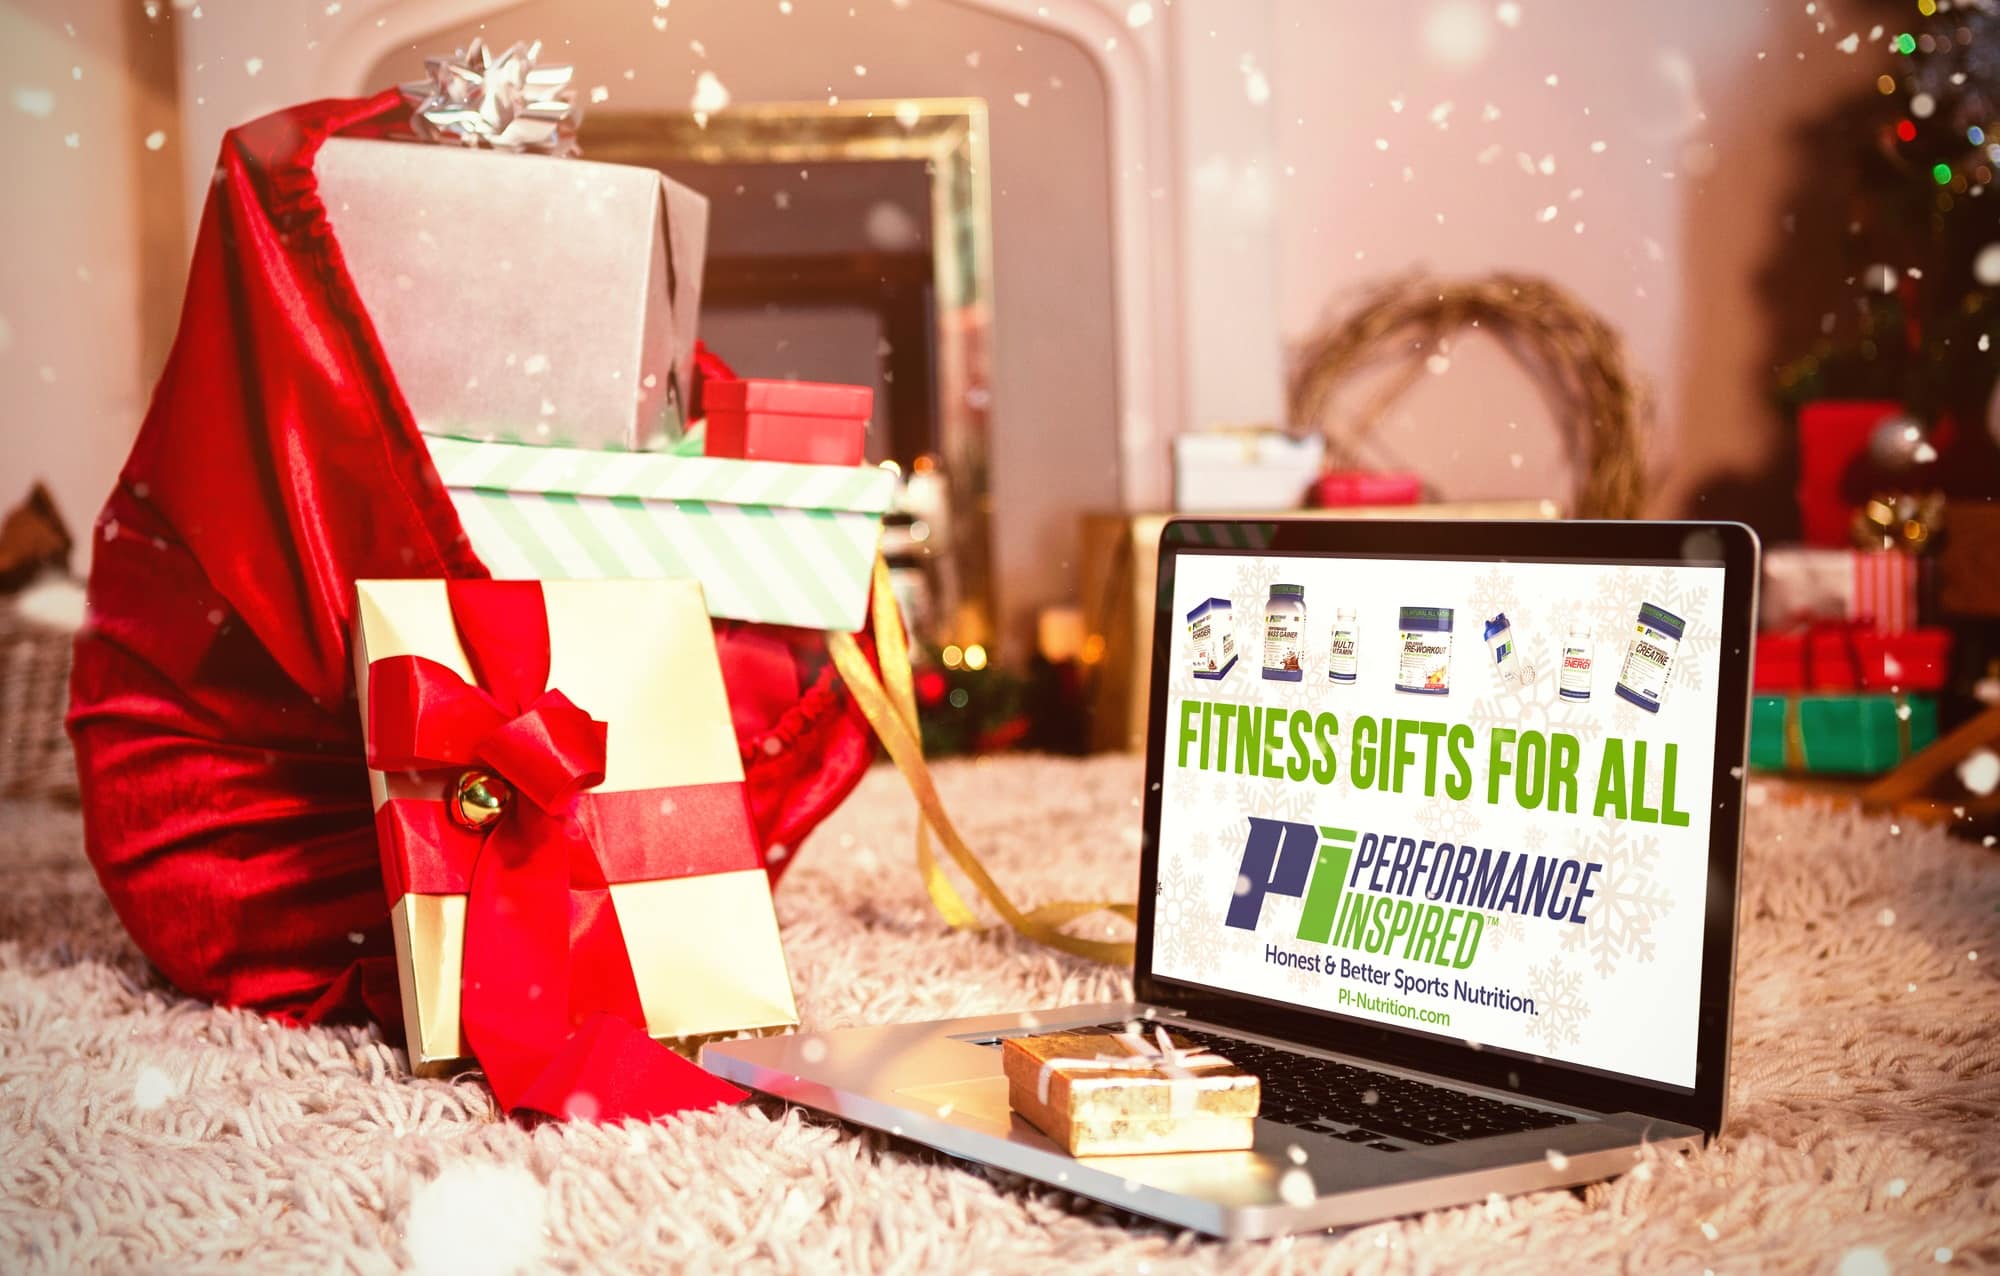 FITNESS GIFTS FOR ALL Performance Inspired Nutrition